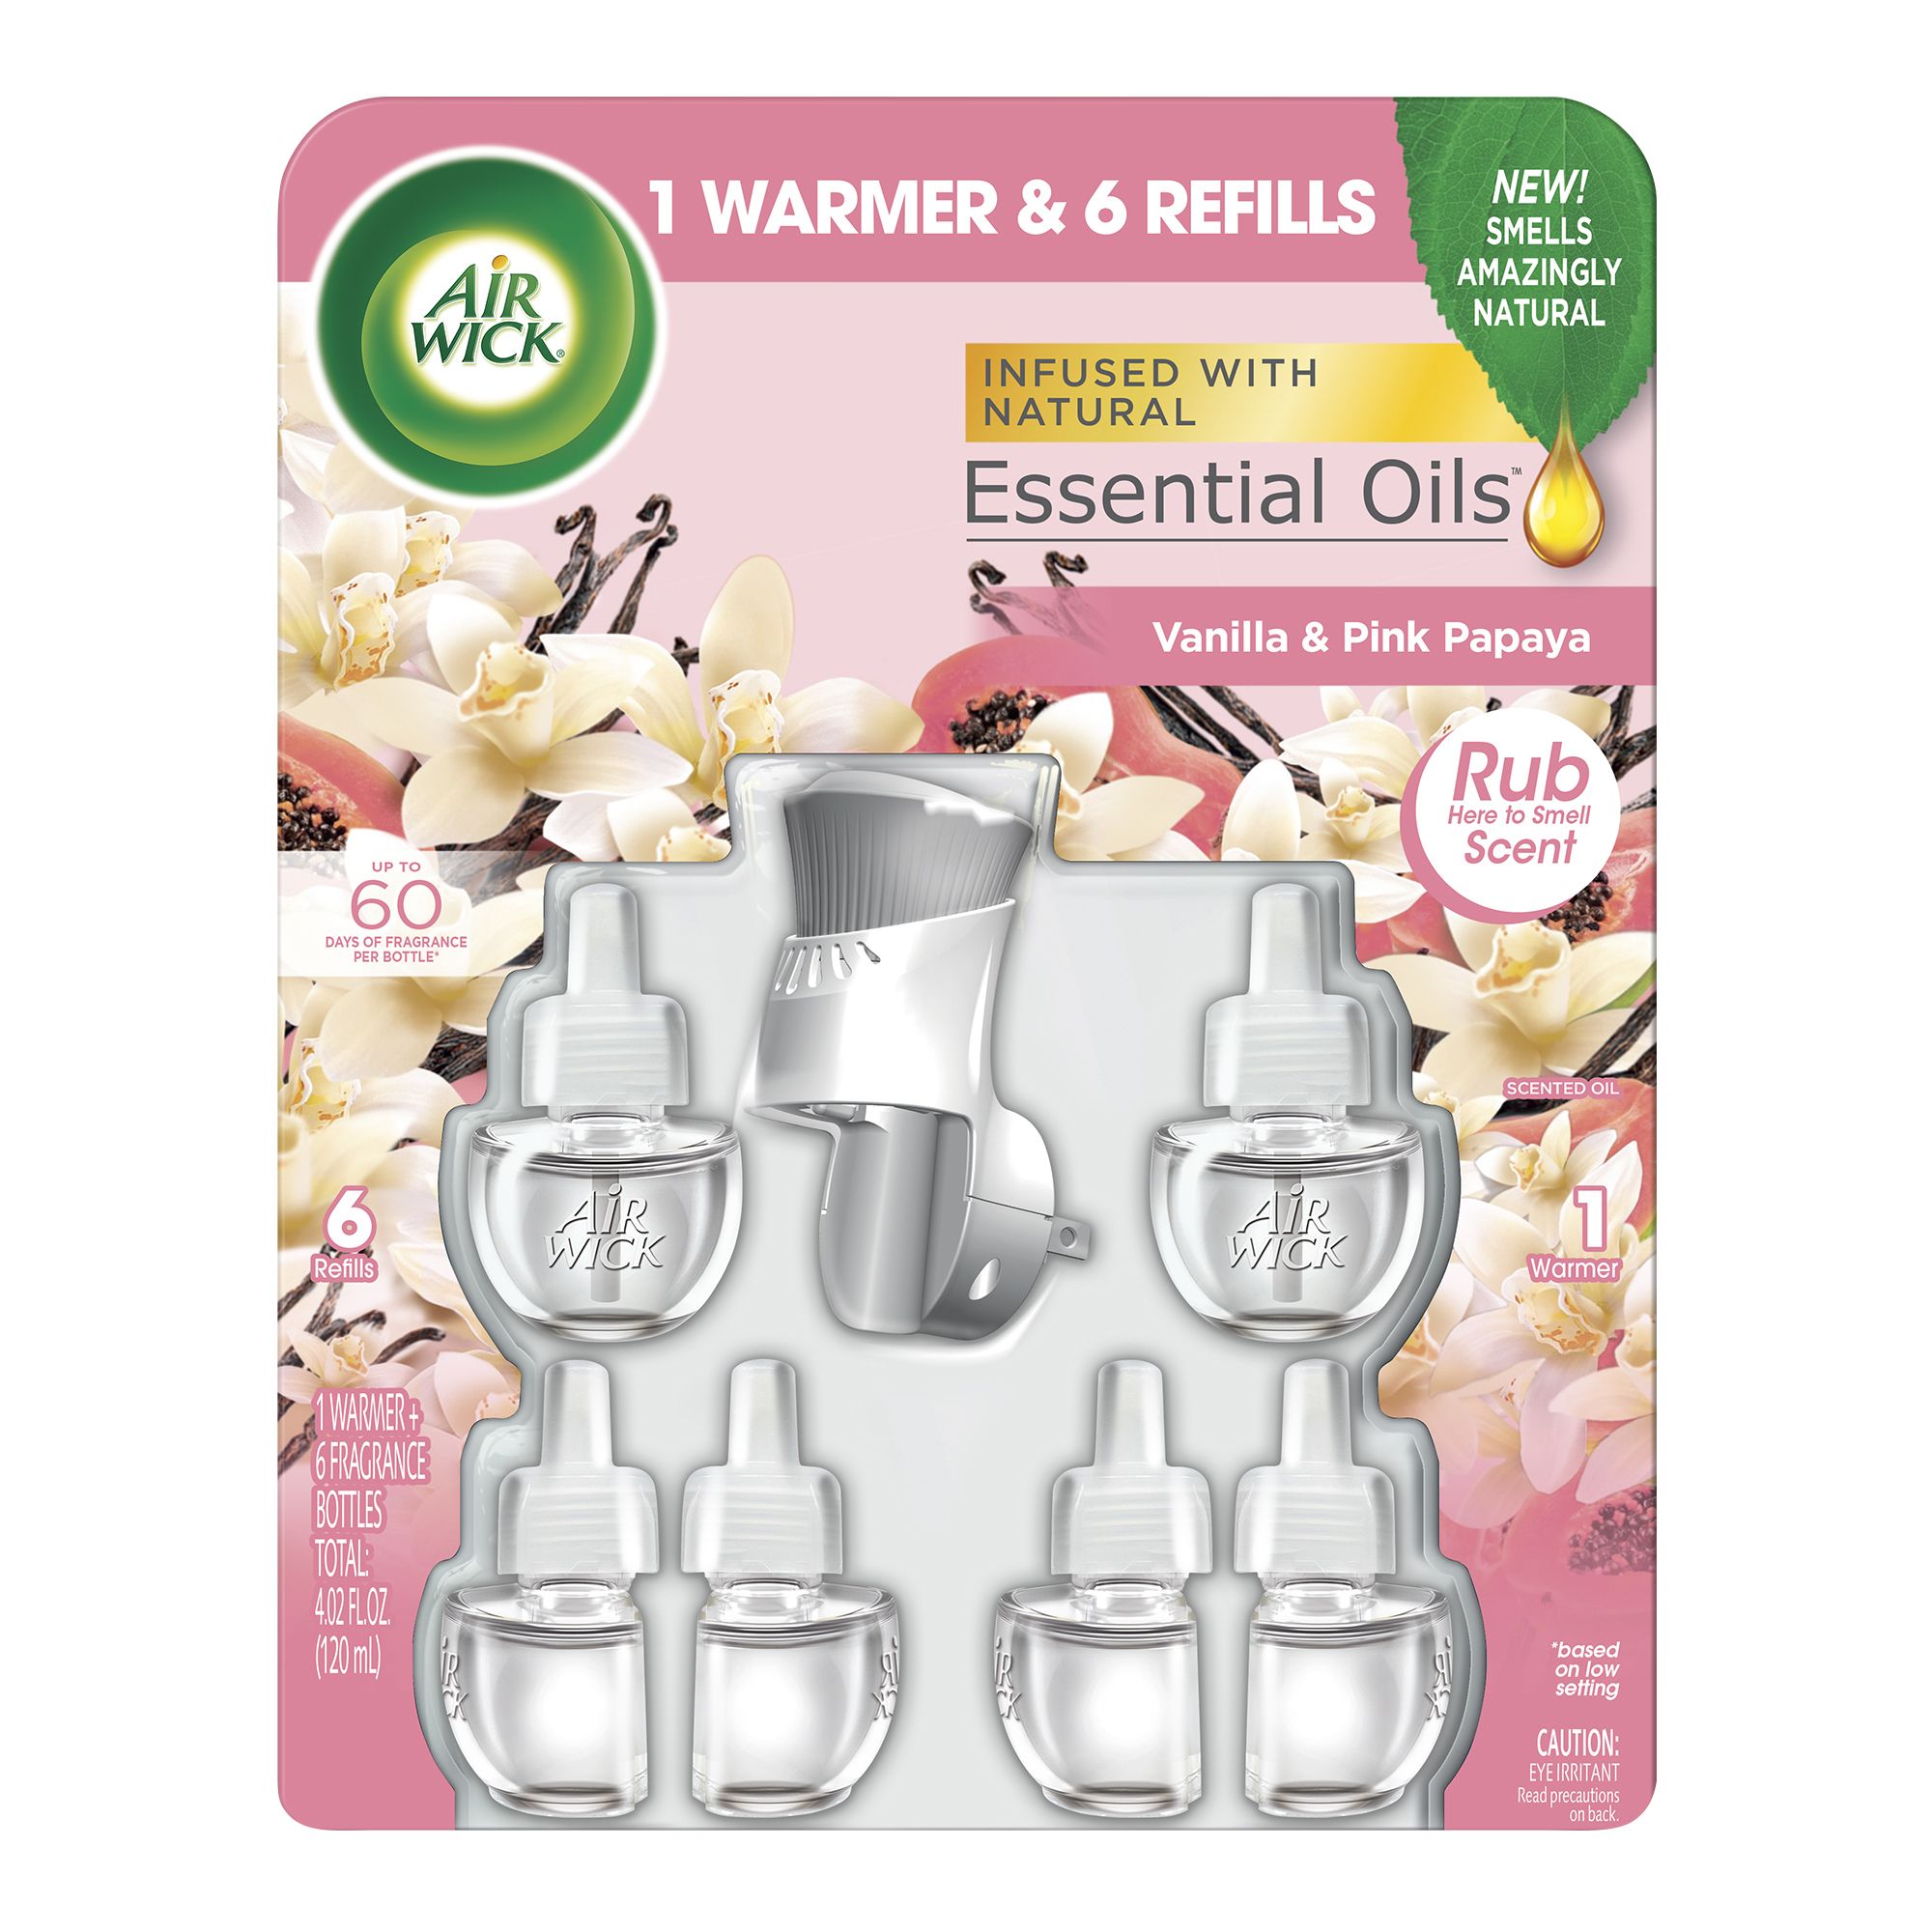 Air Wick Plug in Scented Oil Starter Kit (Warmer + 1 Refill